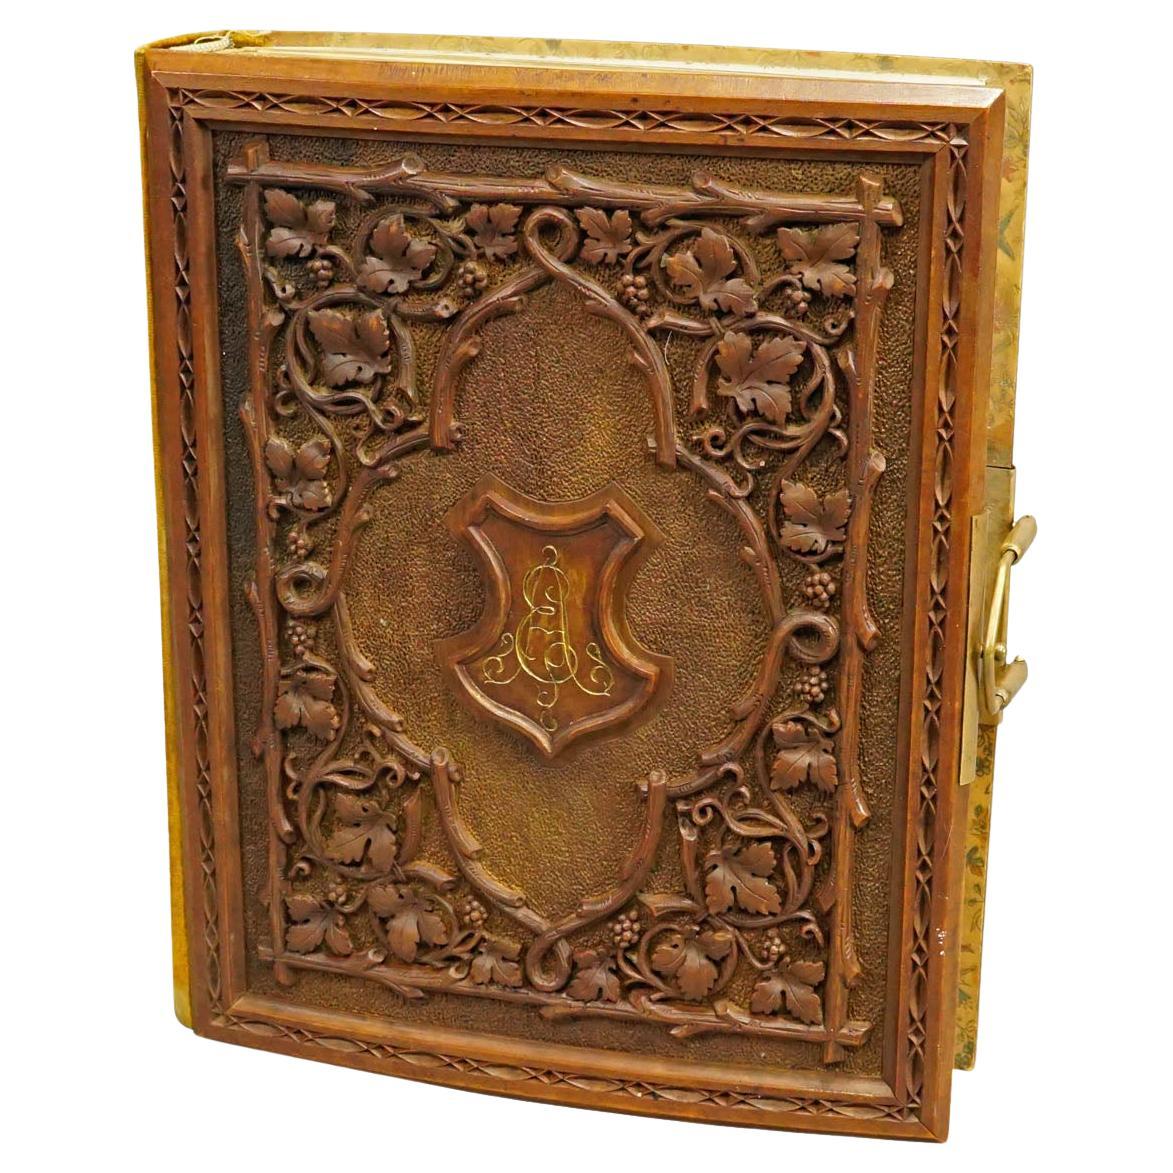 Antique Photo Album with Wooden Carved Cover, Brienz ca. 1900